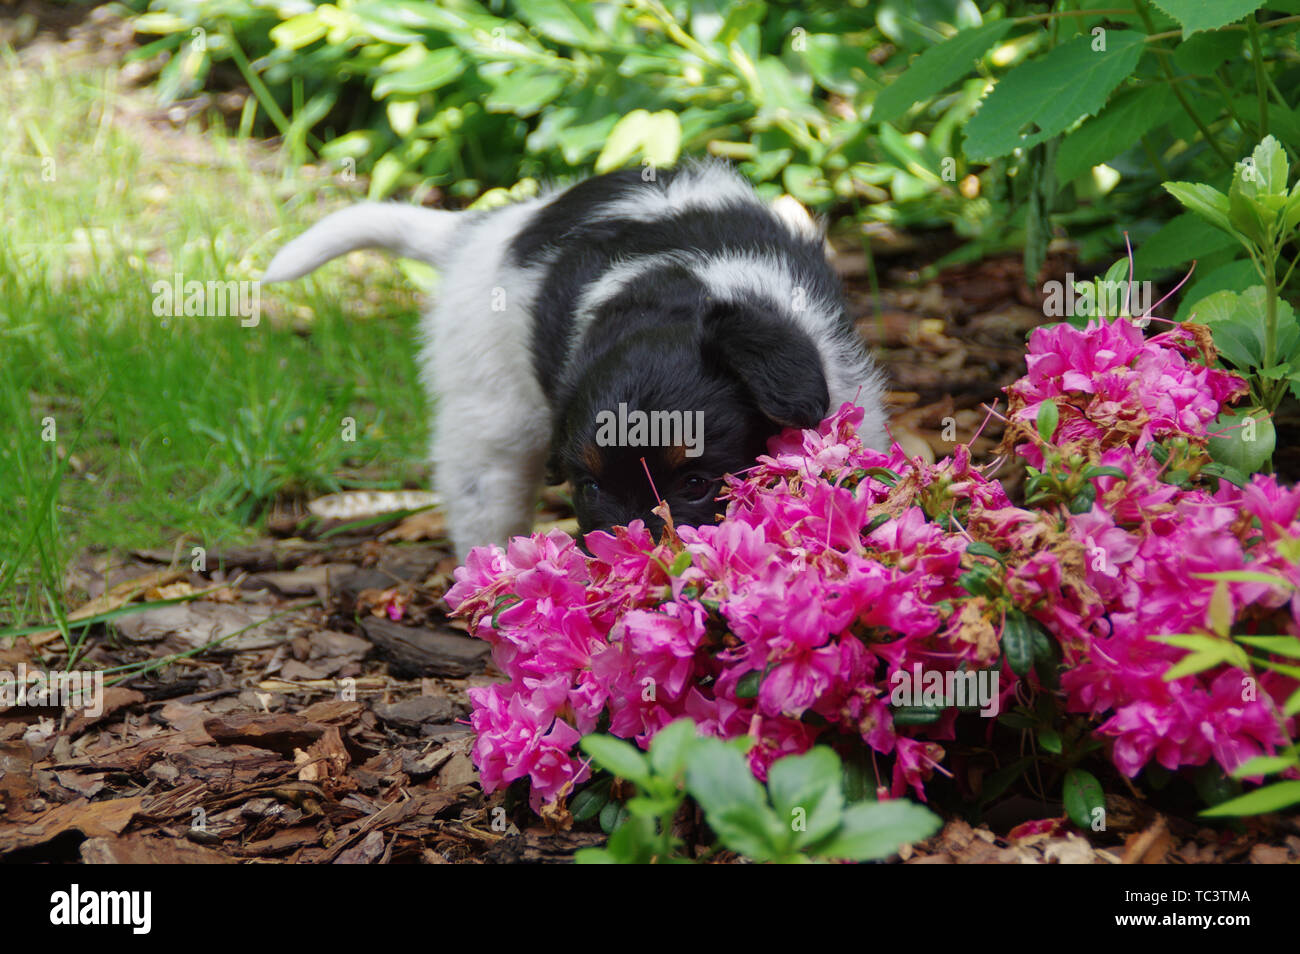 The young dog is smelling the flowers. Sweet puppy in the home garden. Stock Photo